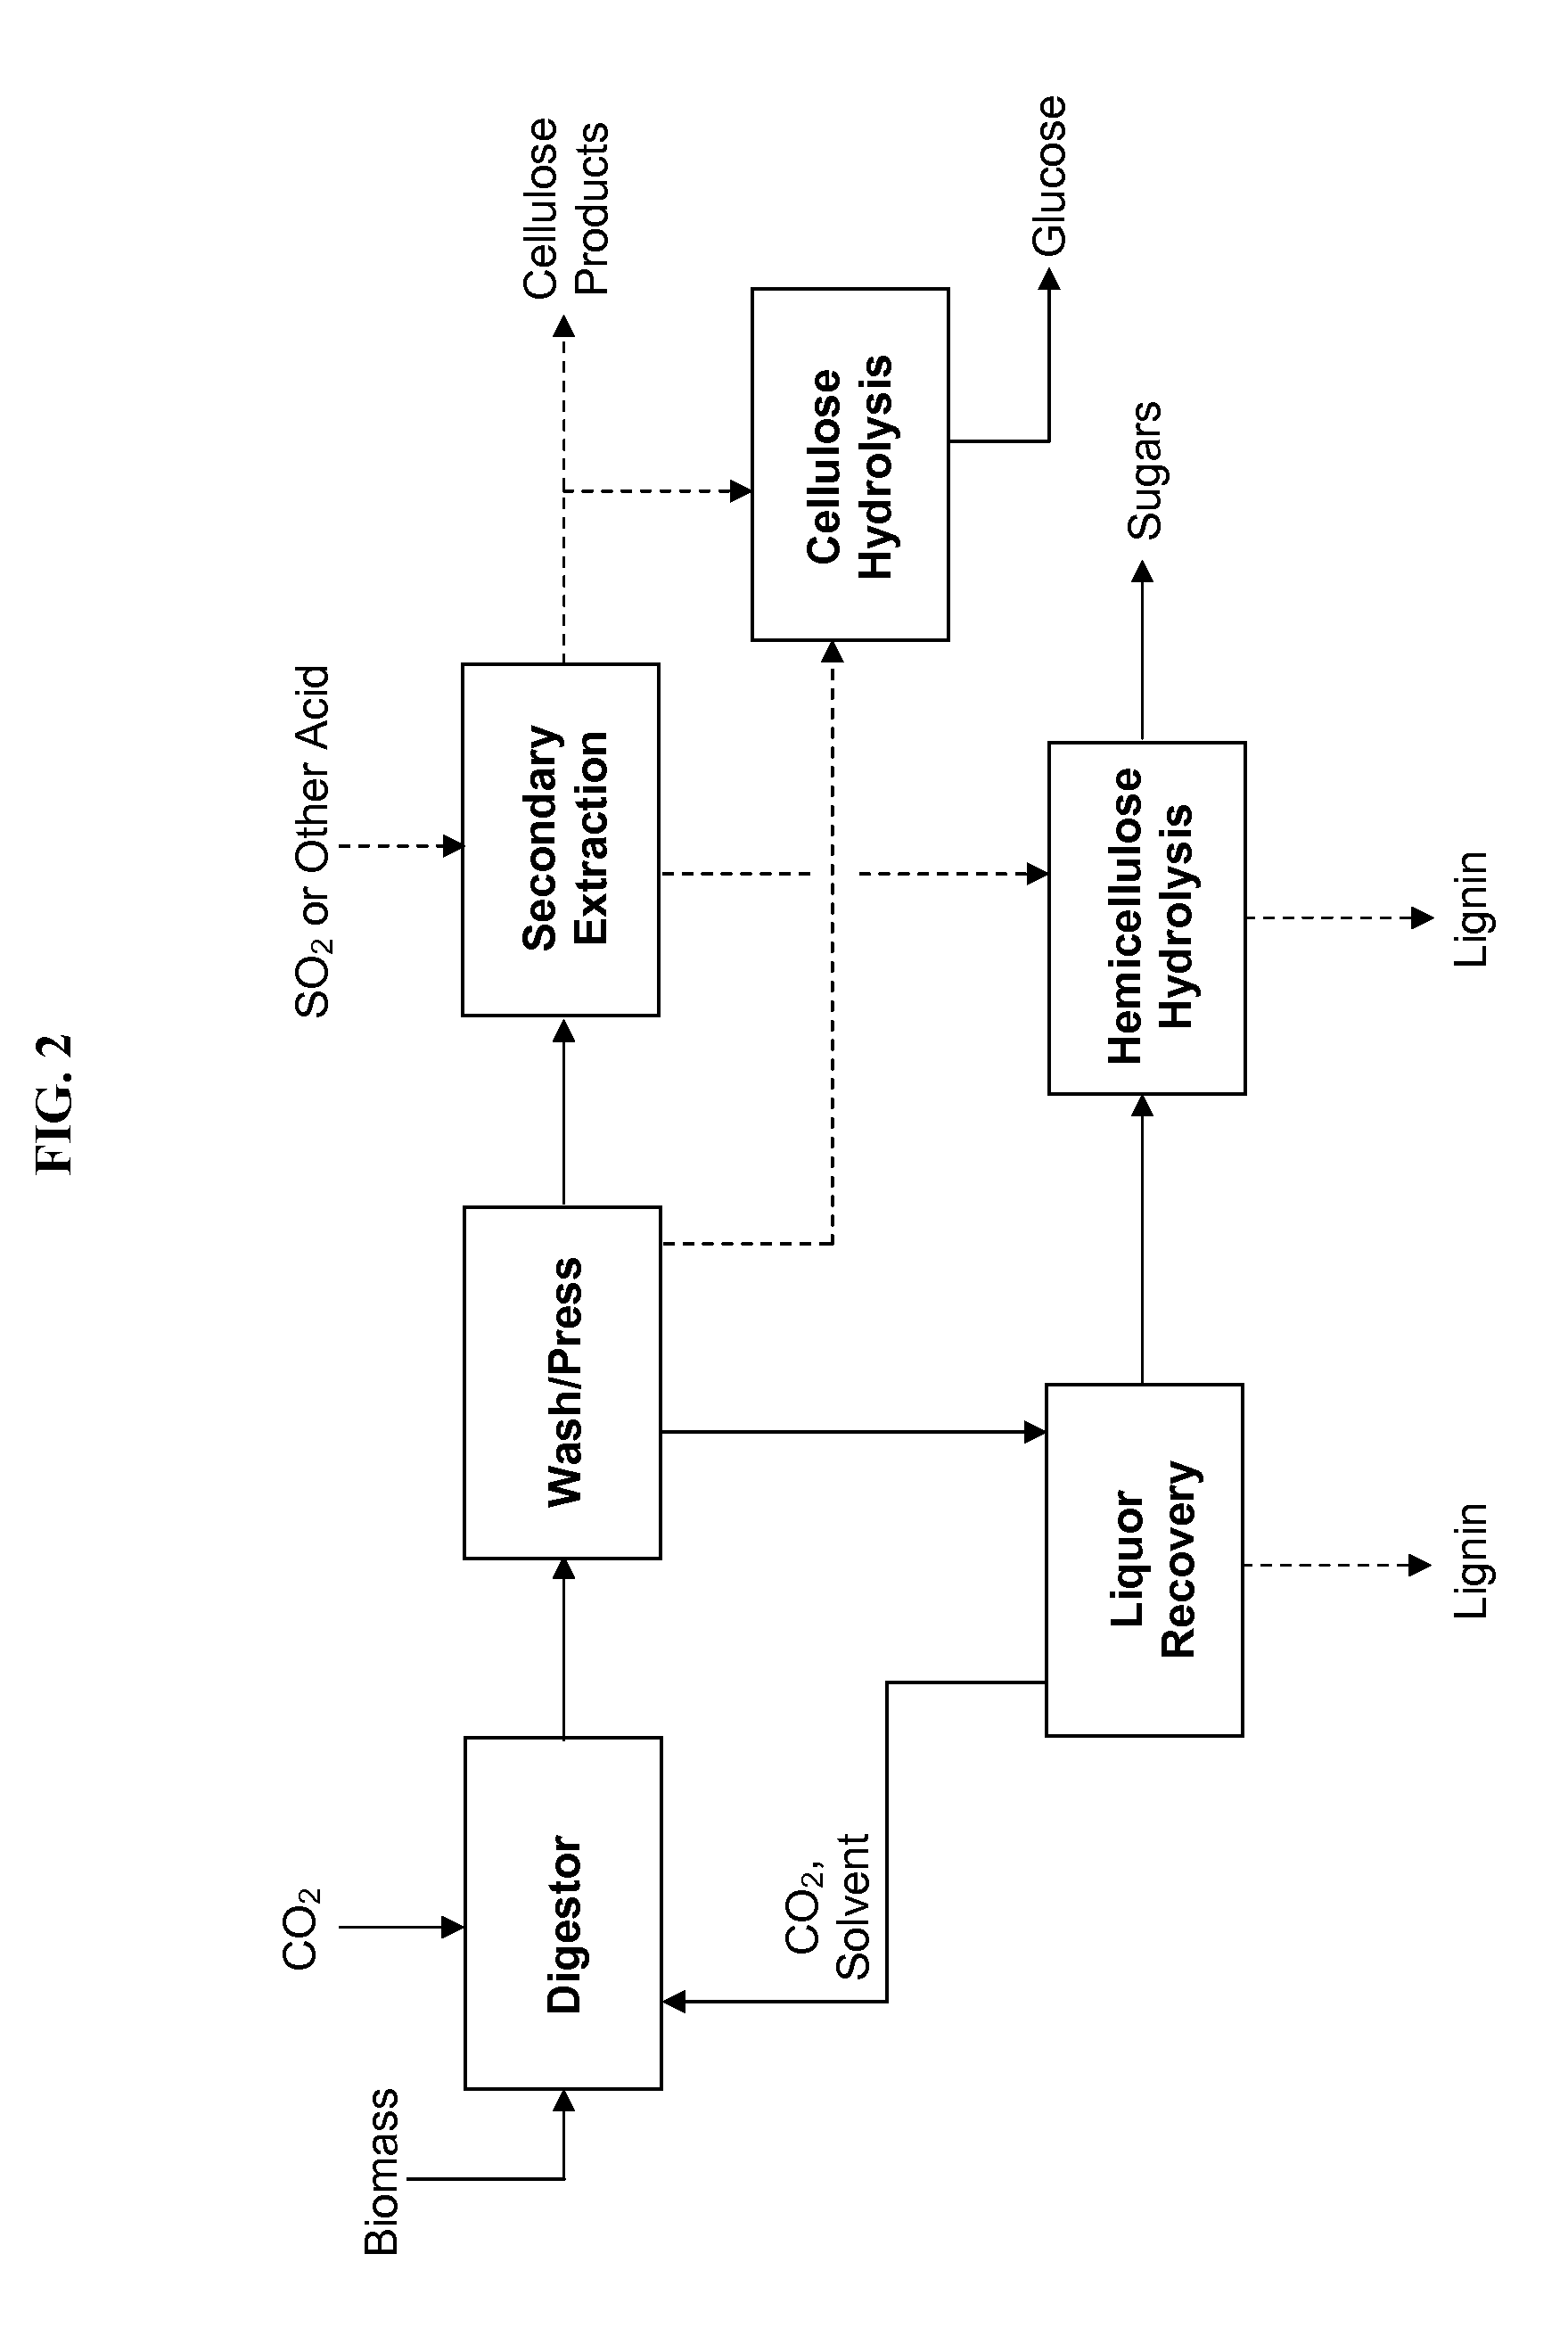 Biorefining processes and apparatus for separating cellulose hemicellulose, and lignin from biomass